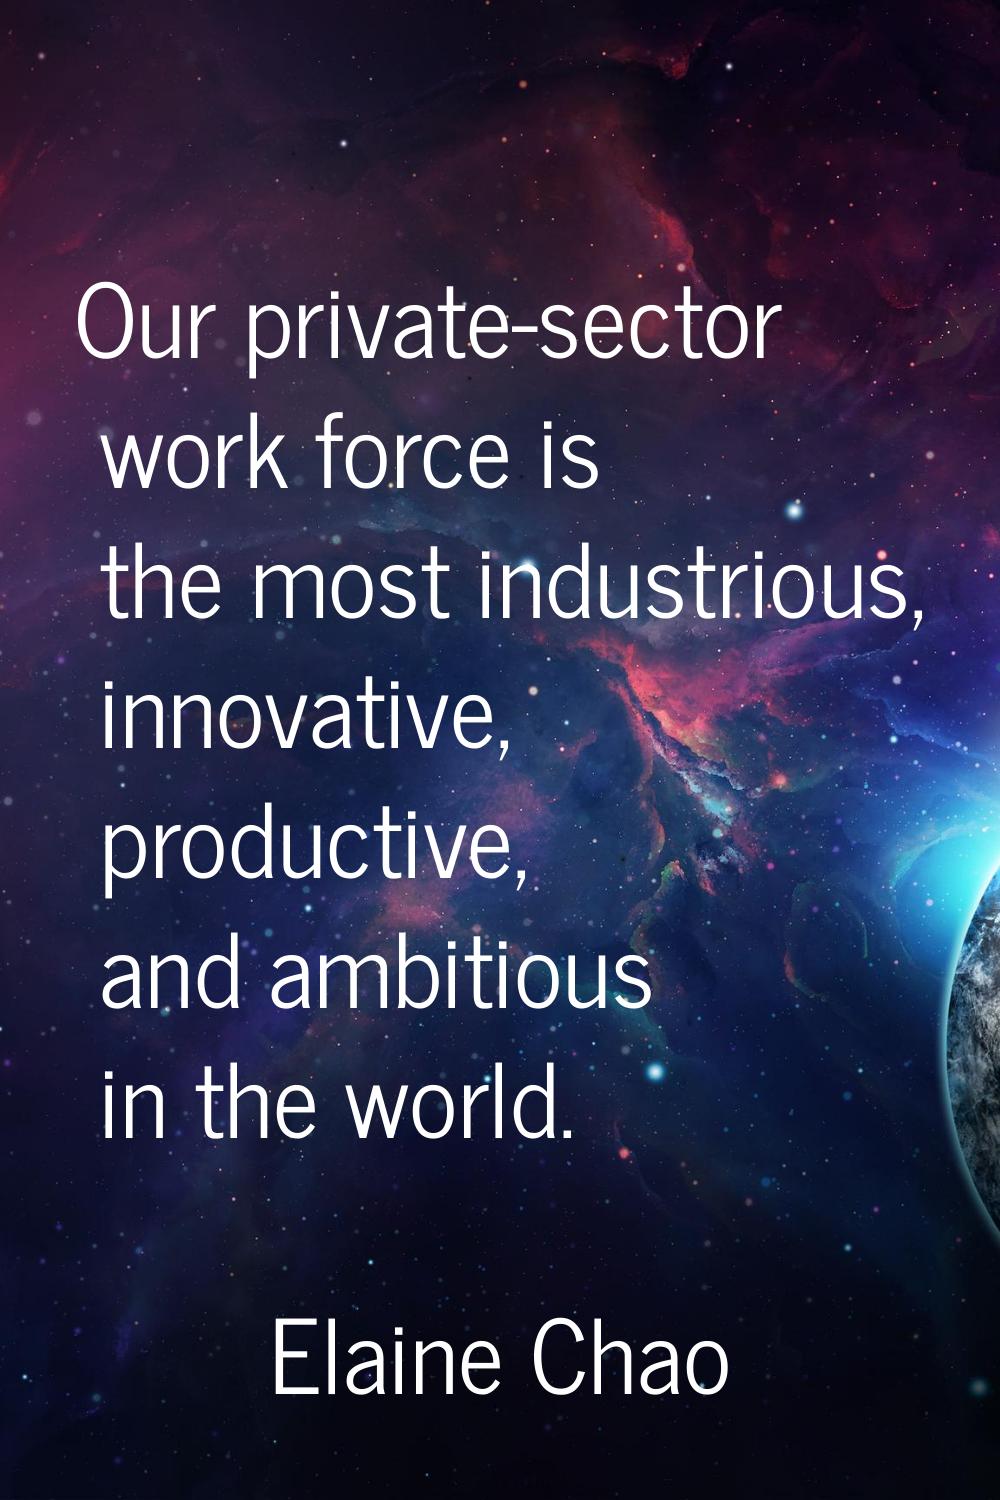 Our private-sector work force is the most industrious, innovative, productive, and ambitious in the